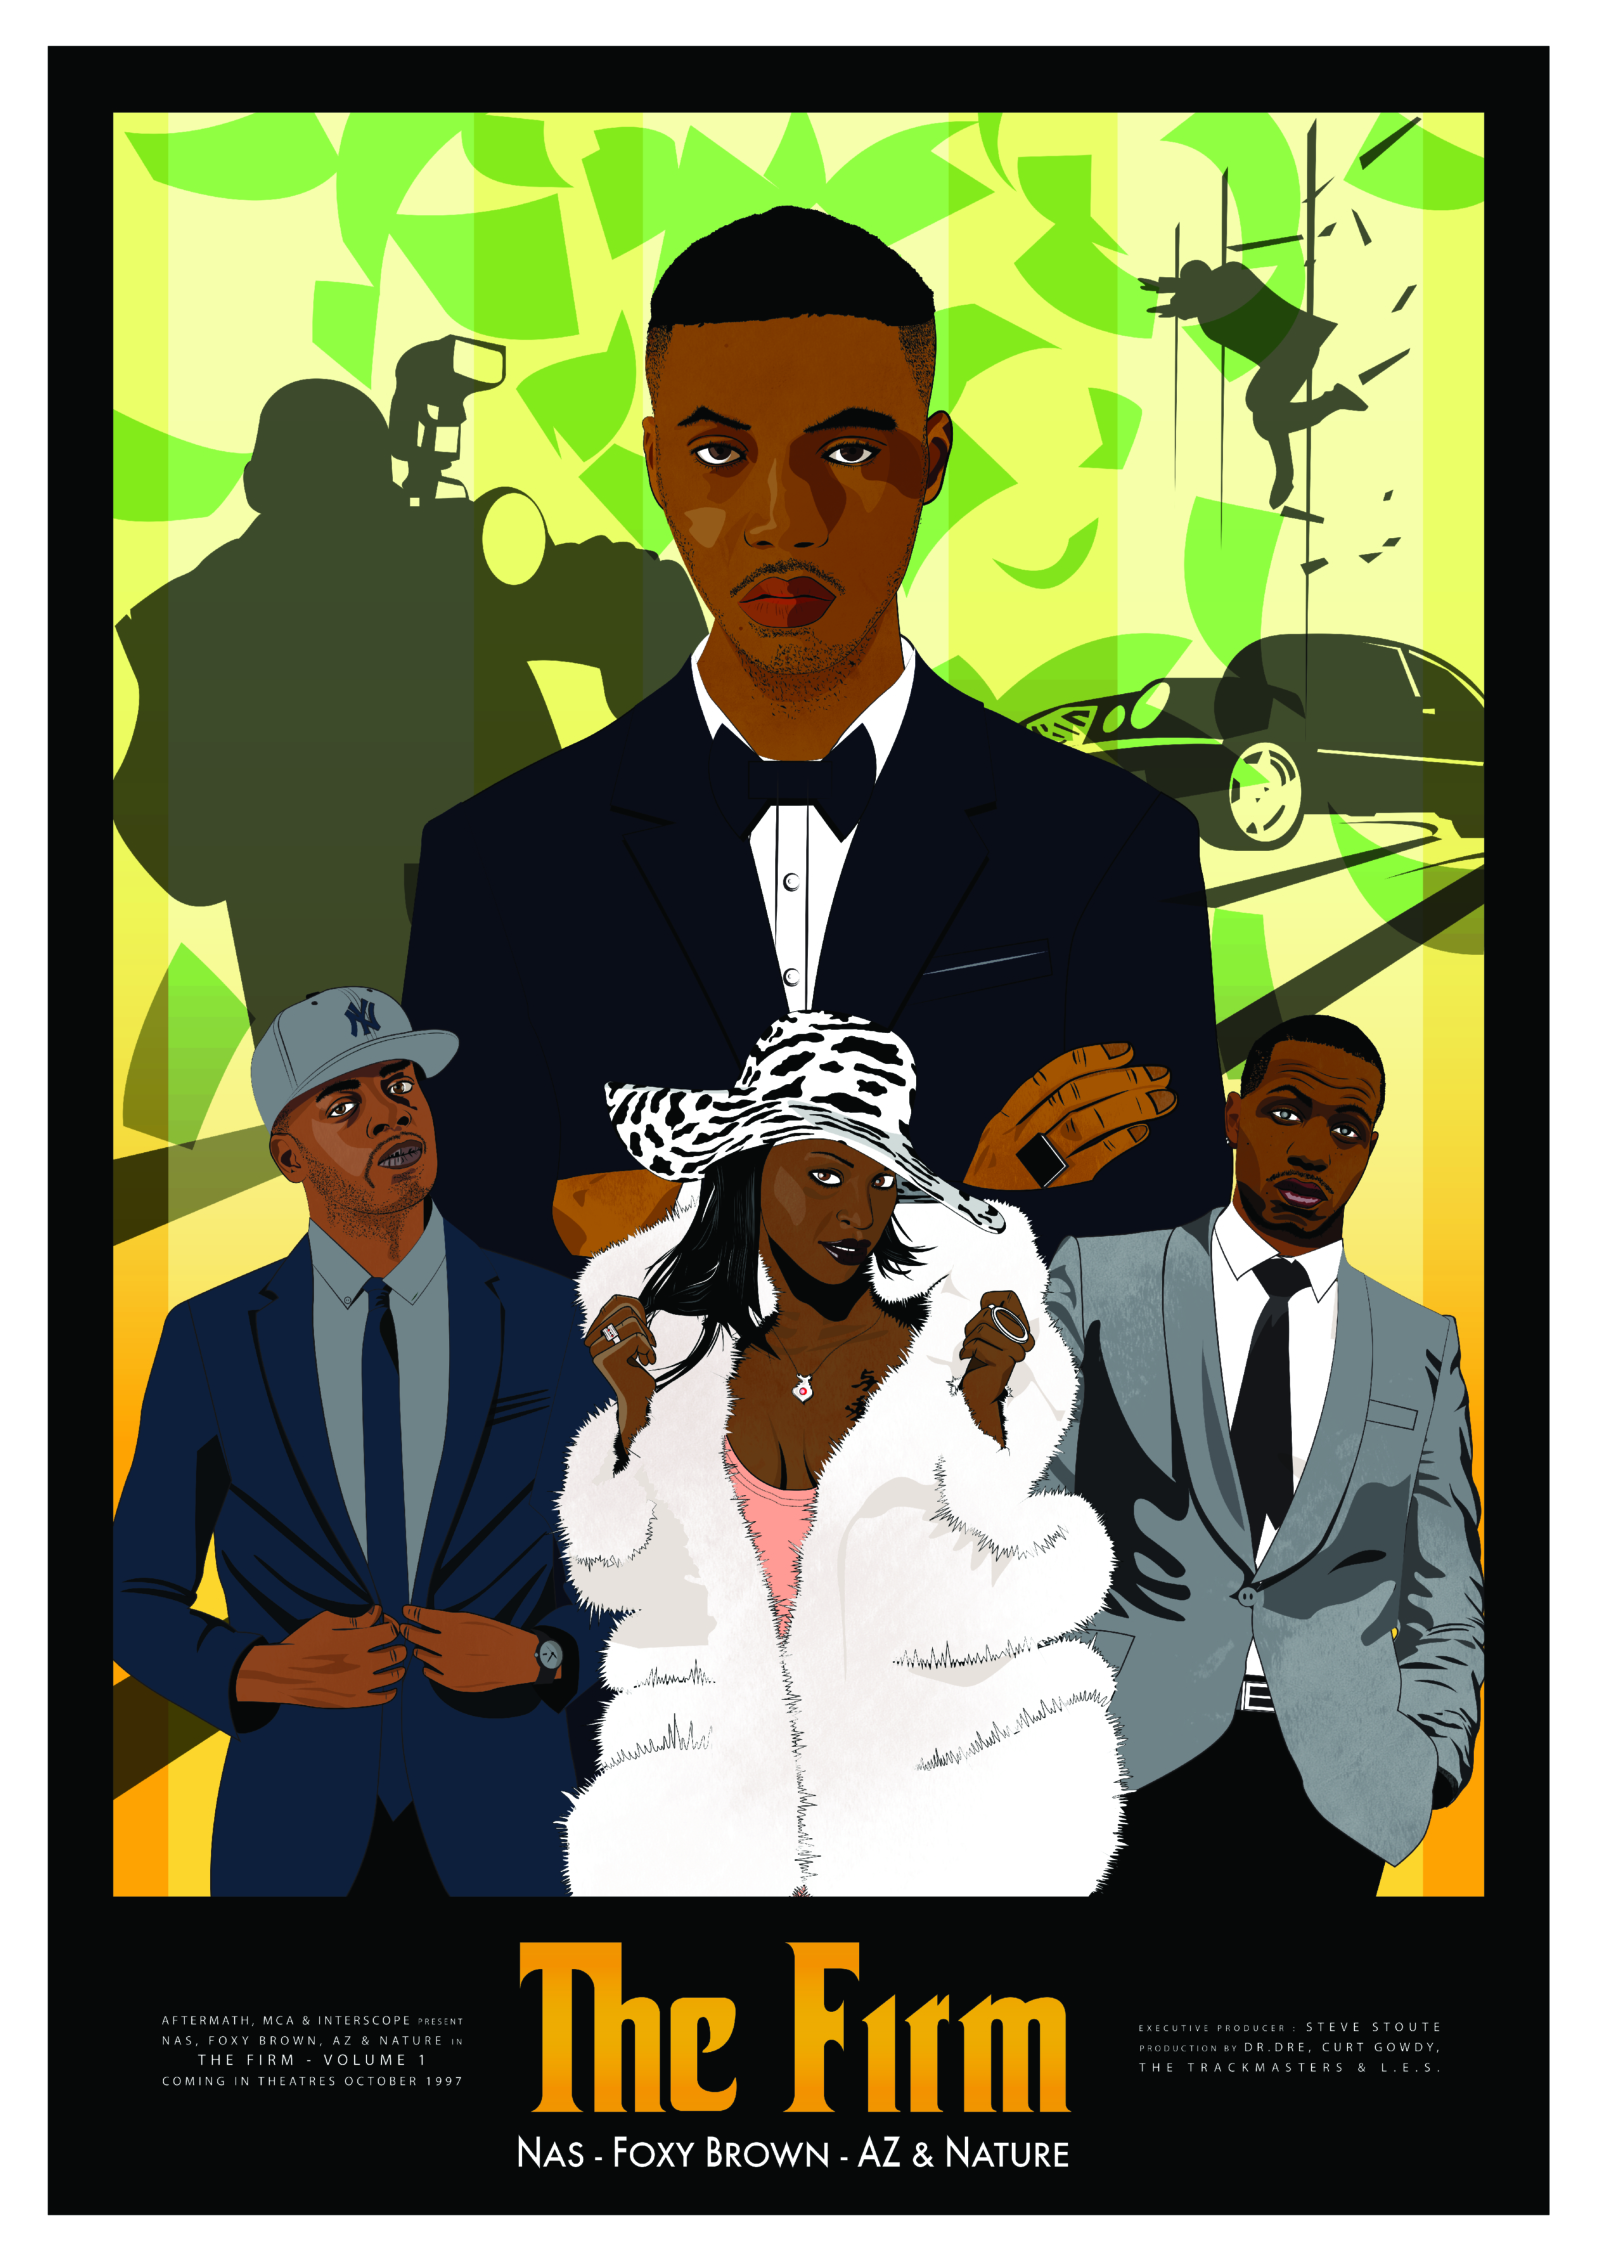 nas-presents-the-firm-the-album-1997-posterspy